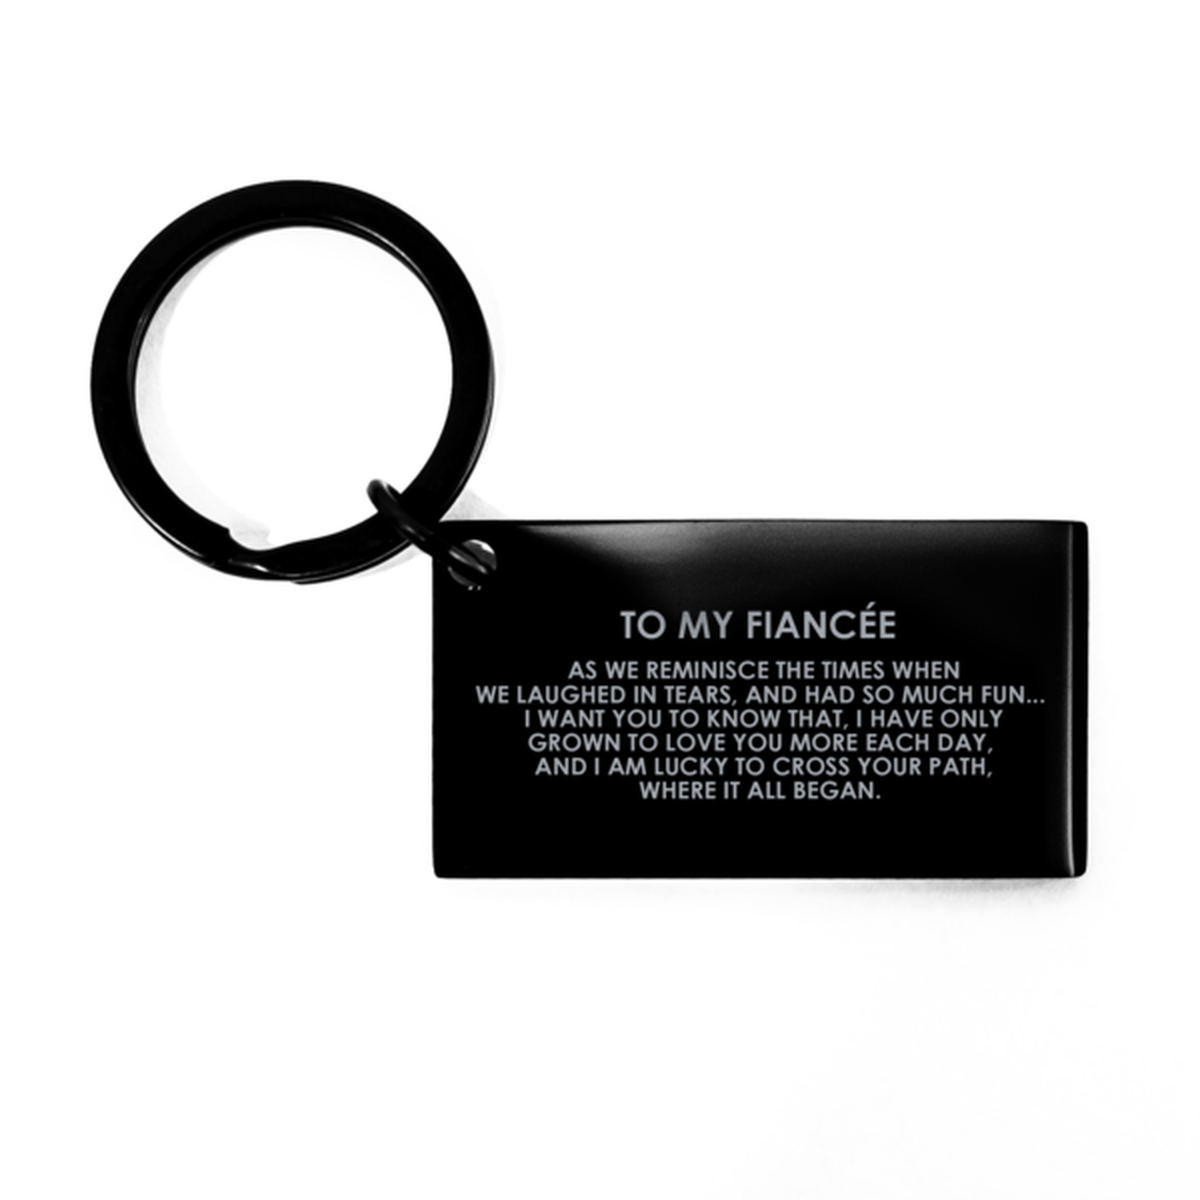 To My Fiancée  Black Keychain, I Am Lucky To Cross Your Path, Birthday Gifts For Fiancée  From Fiancé, Valentines Gifts For Women